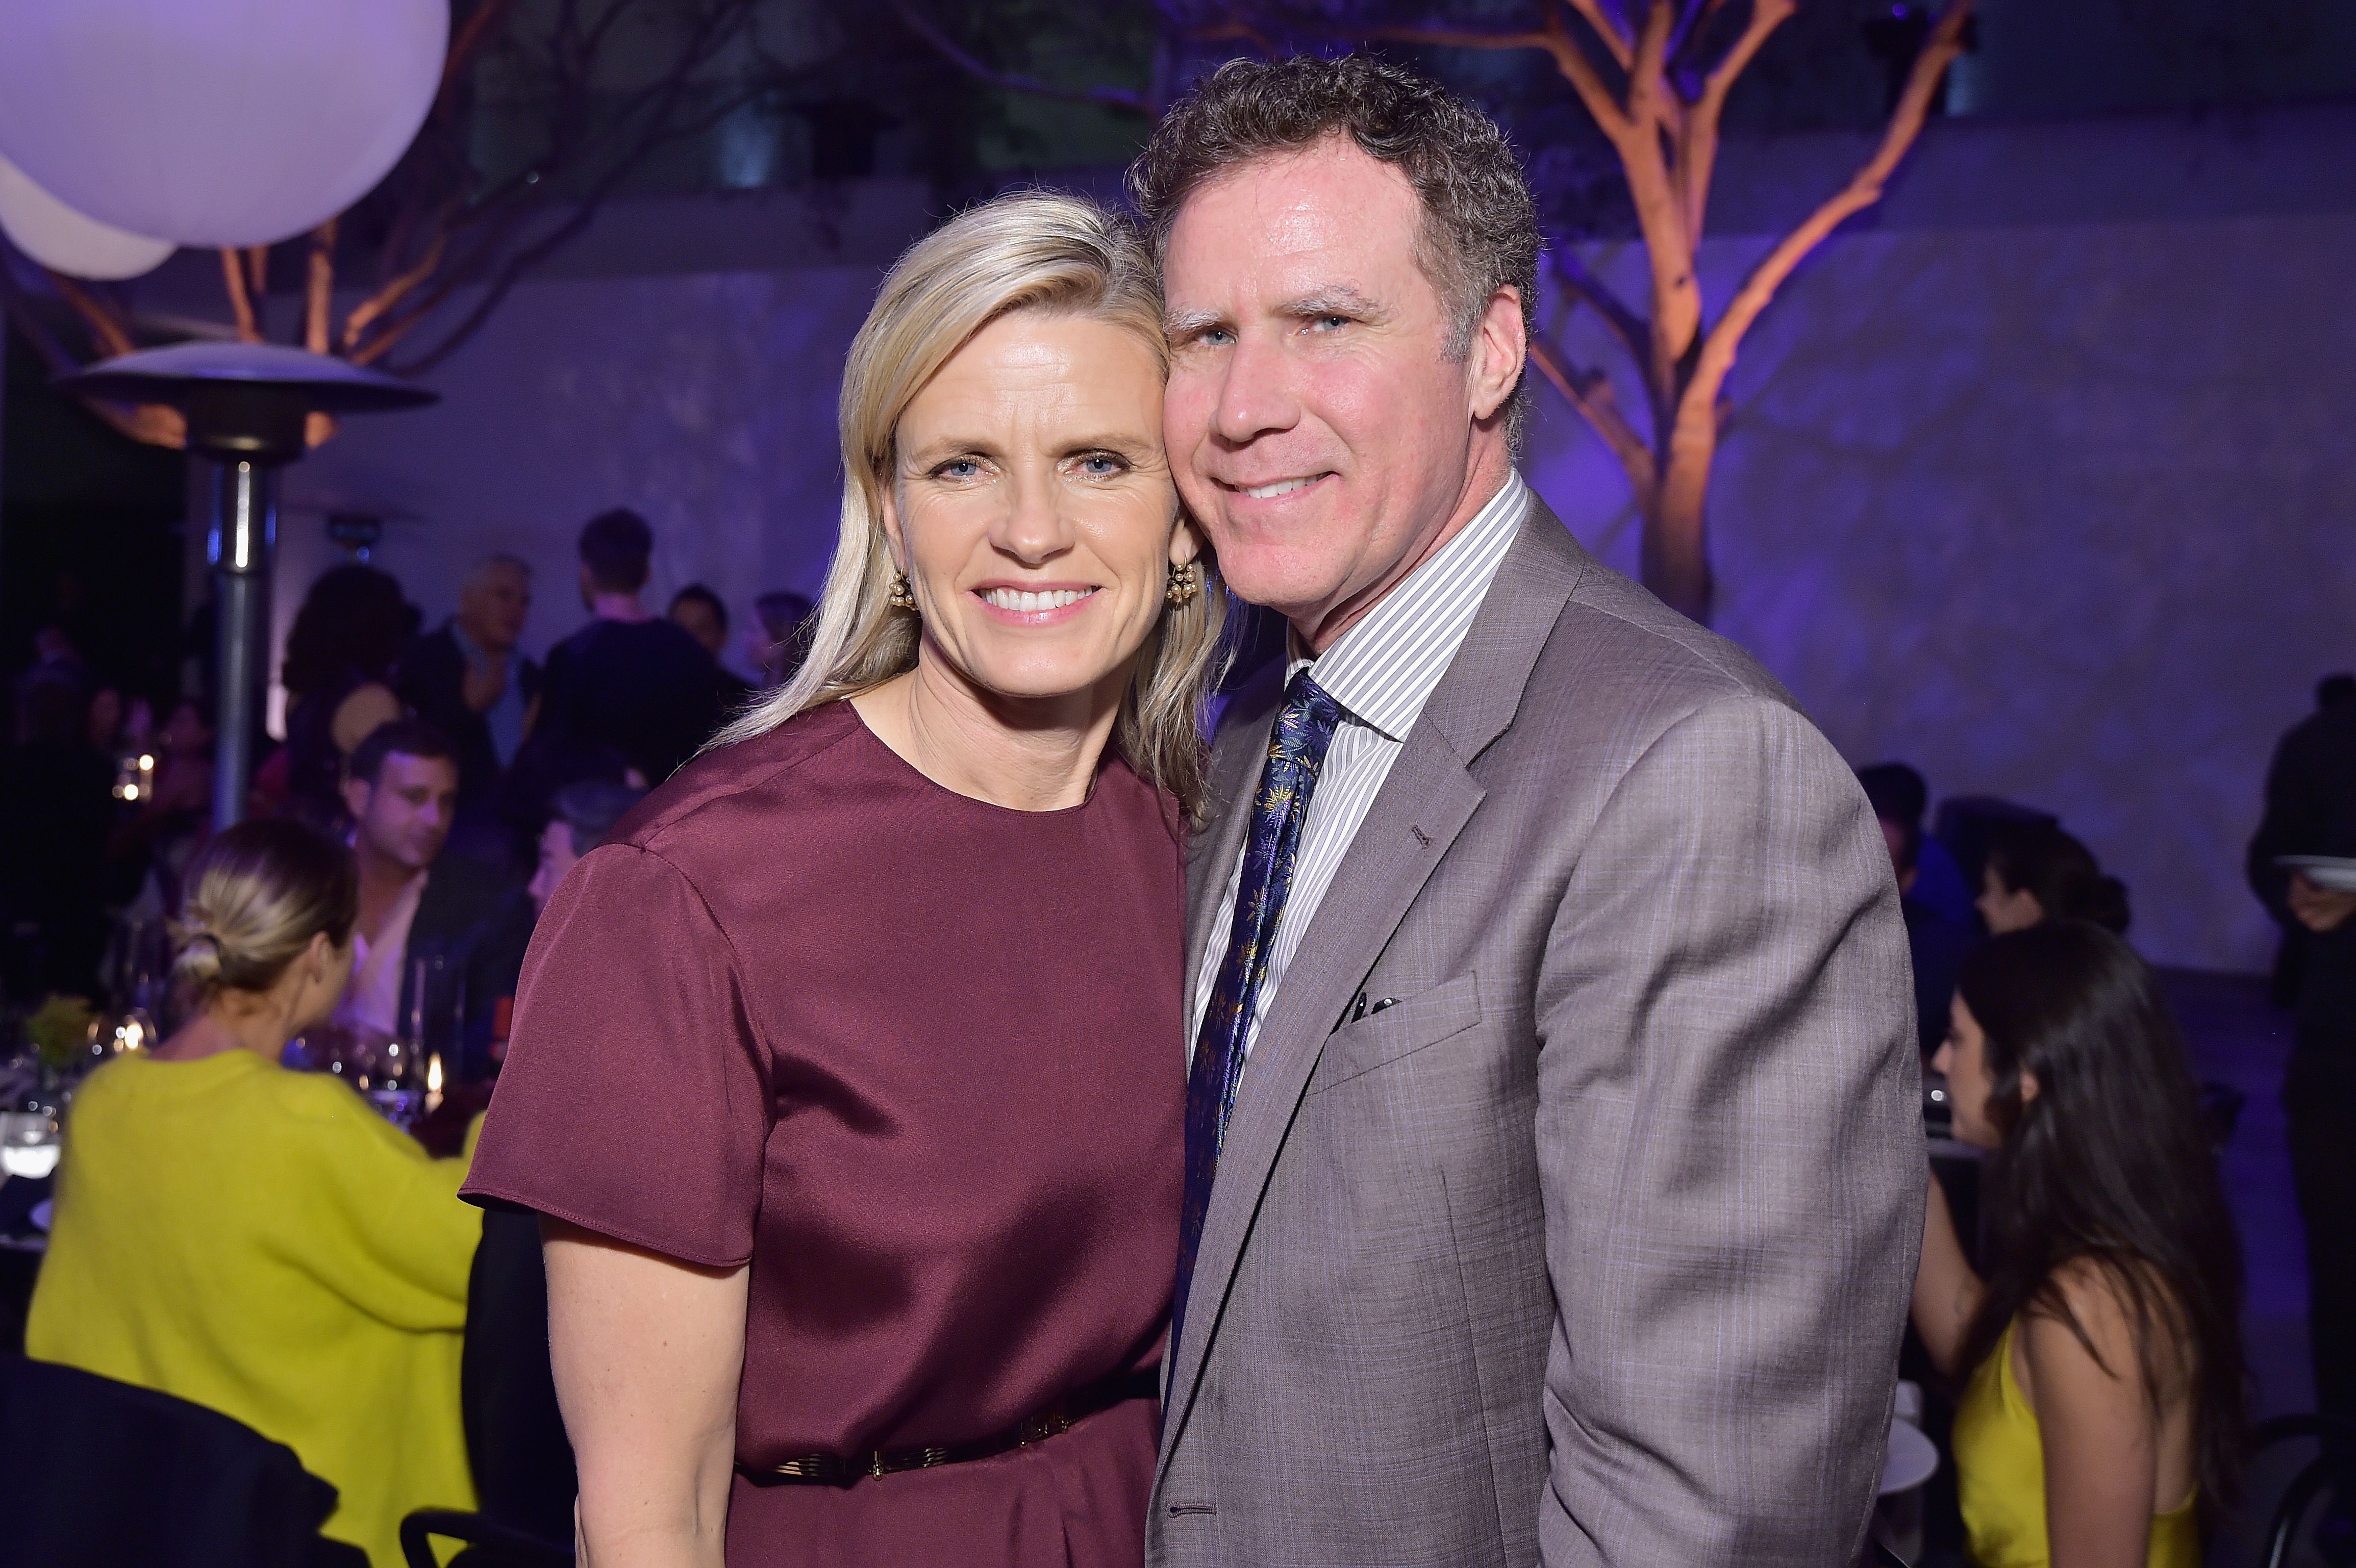 Viveca Paulin and Will Ferrell during the Hammer Museum 16th Annual Gala in the Garden with generous support from South Coast Plaza at the Hammer Museum on October 14, 2018 in Los Angeles, California. | Source: Getty Images